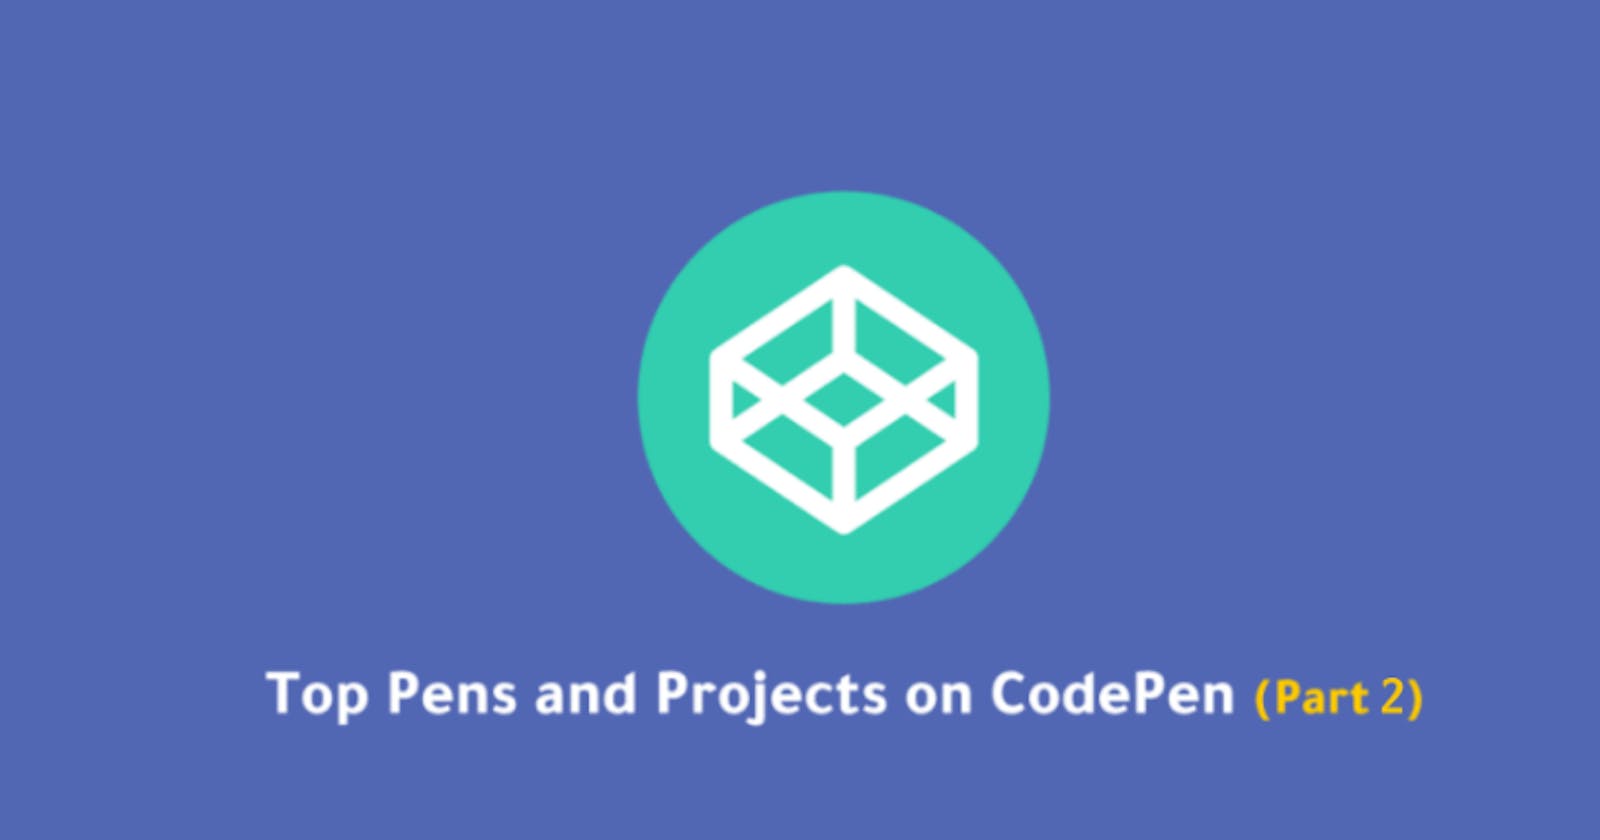 Top Pens and Projects on CodePen (Part 2)